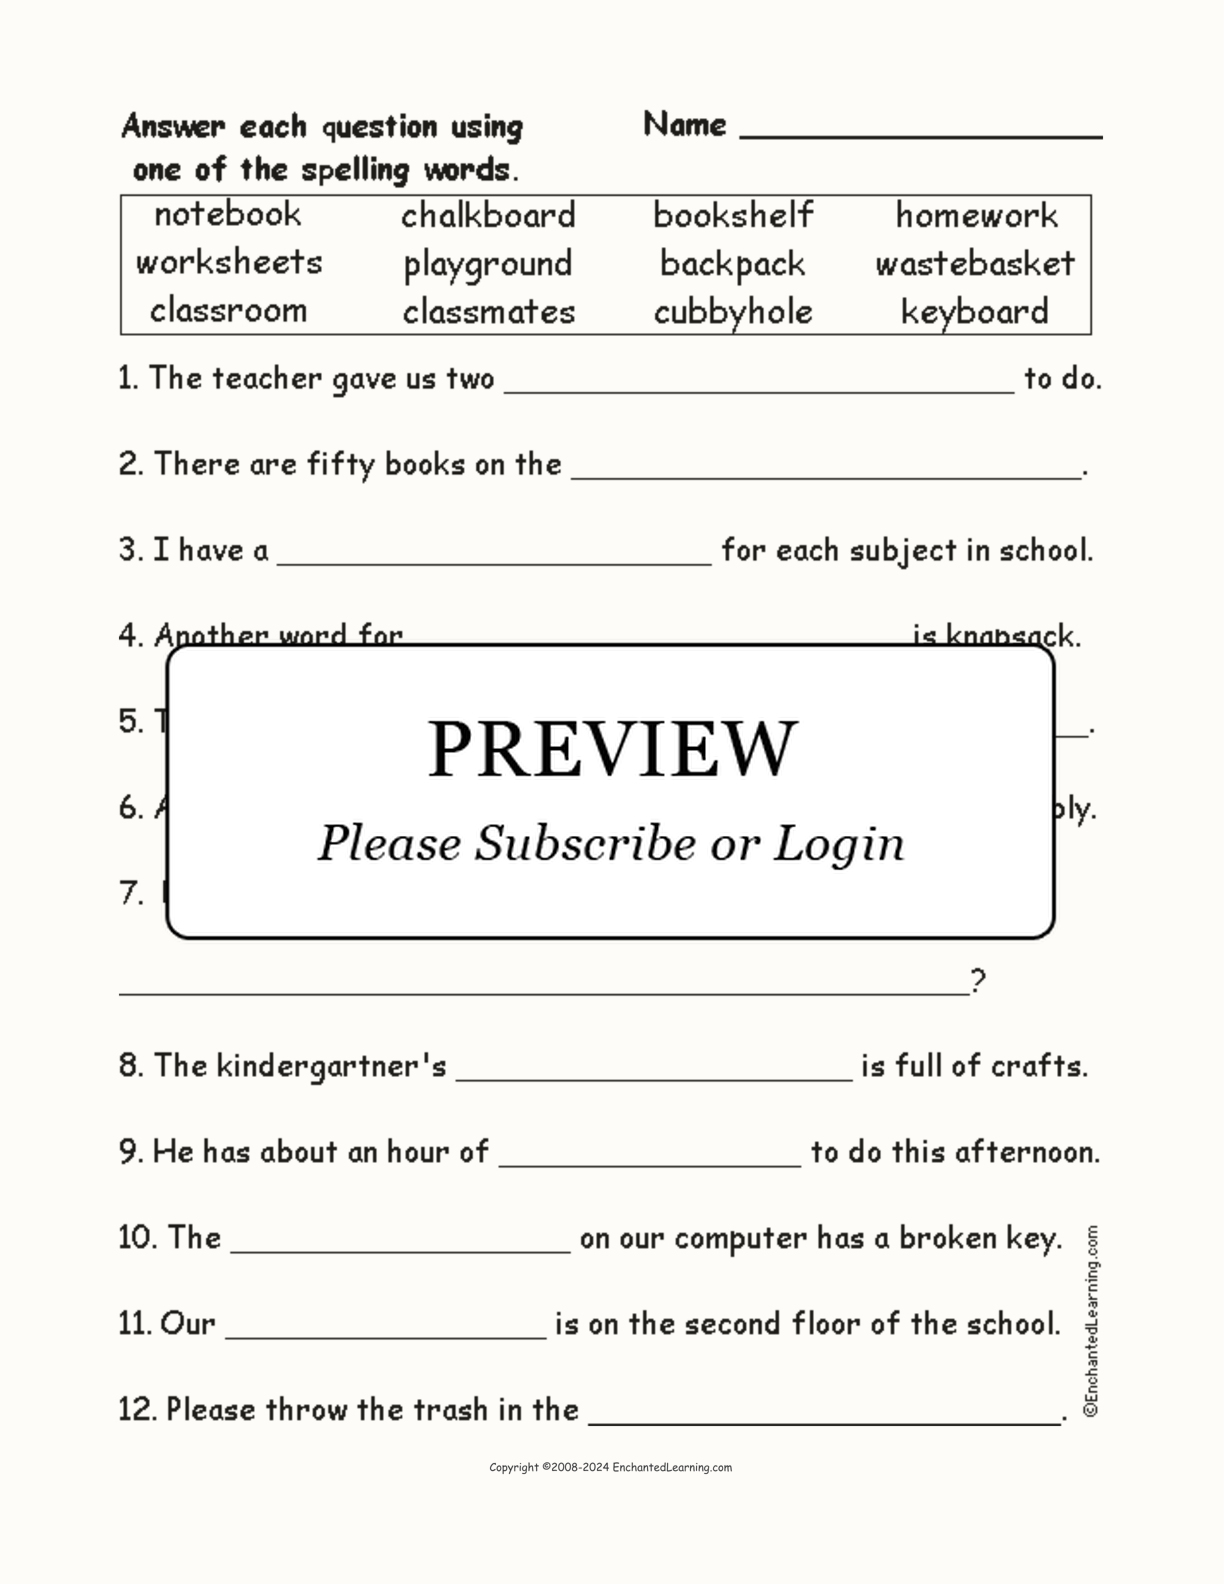 Compound School Spelling Word Questions interactive worksheet page 1